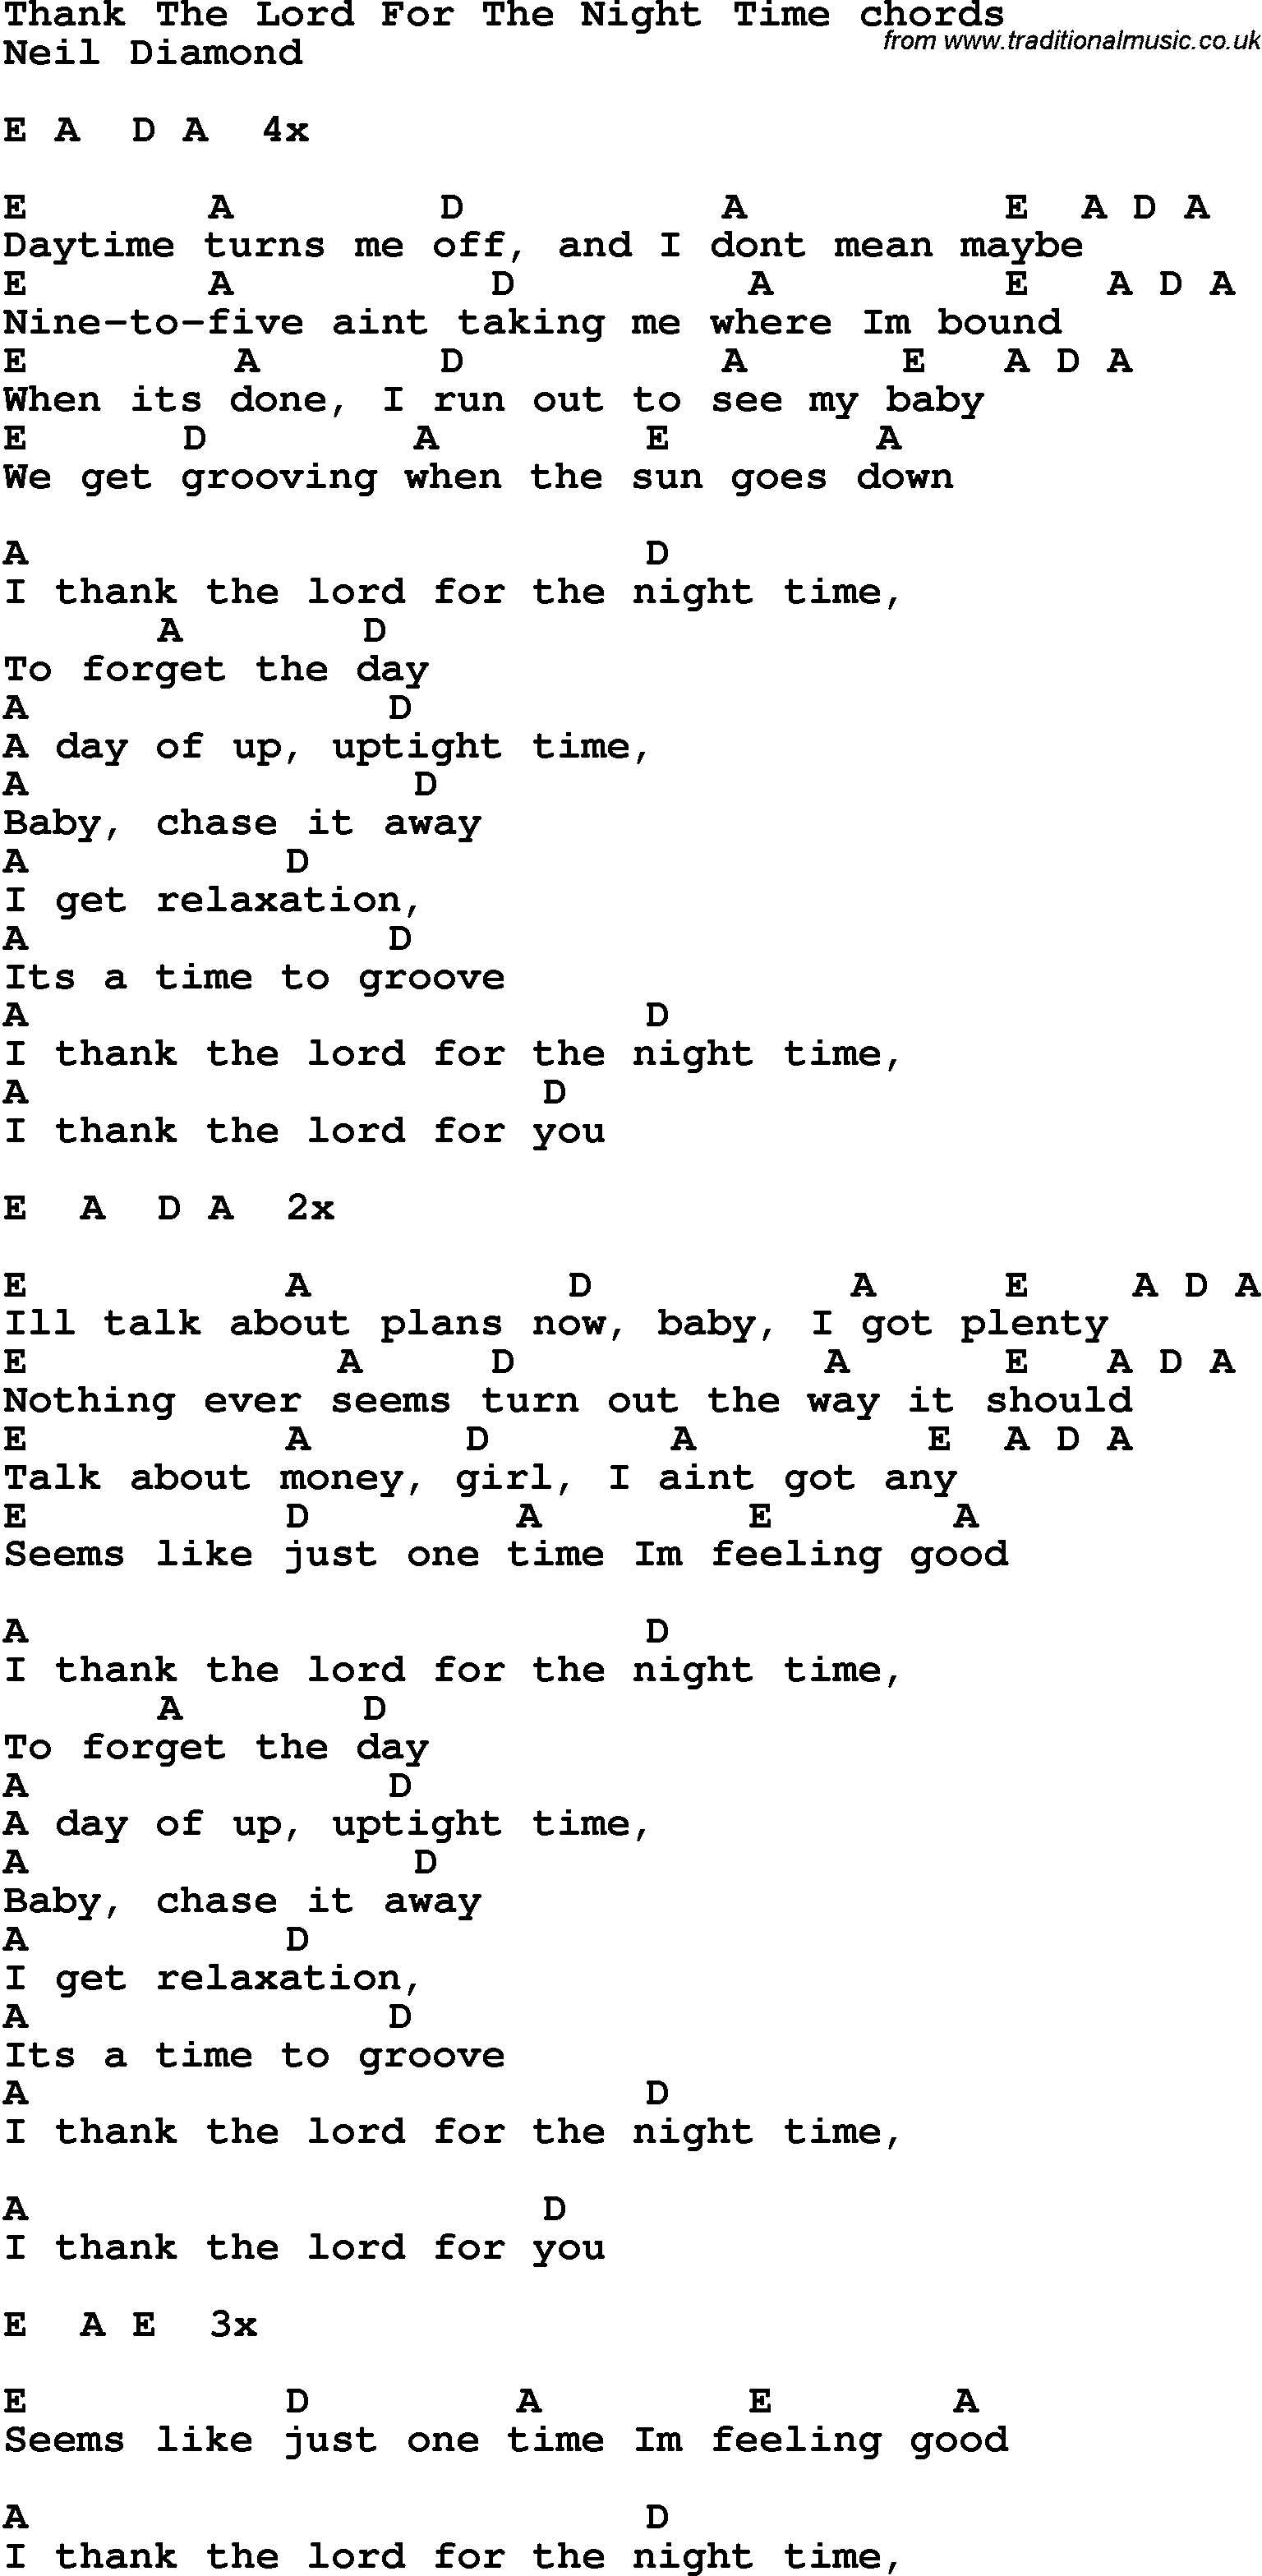 Song Lyrics with guitar chords for Thank The Lord For The Nightime